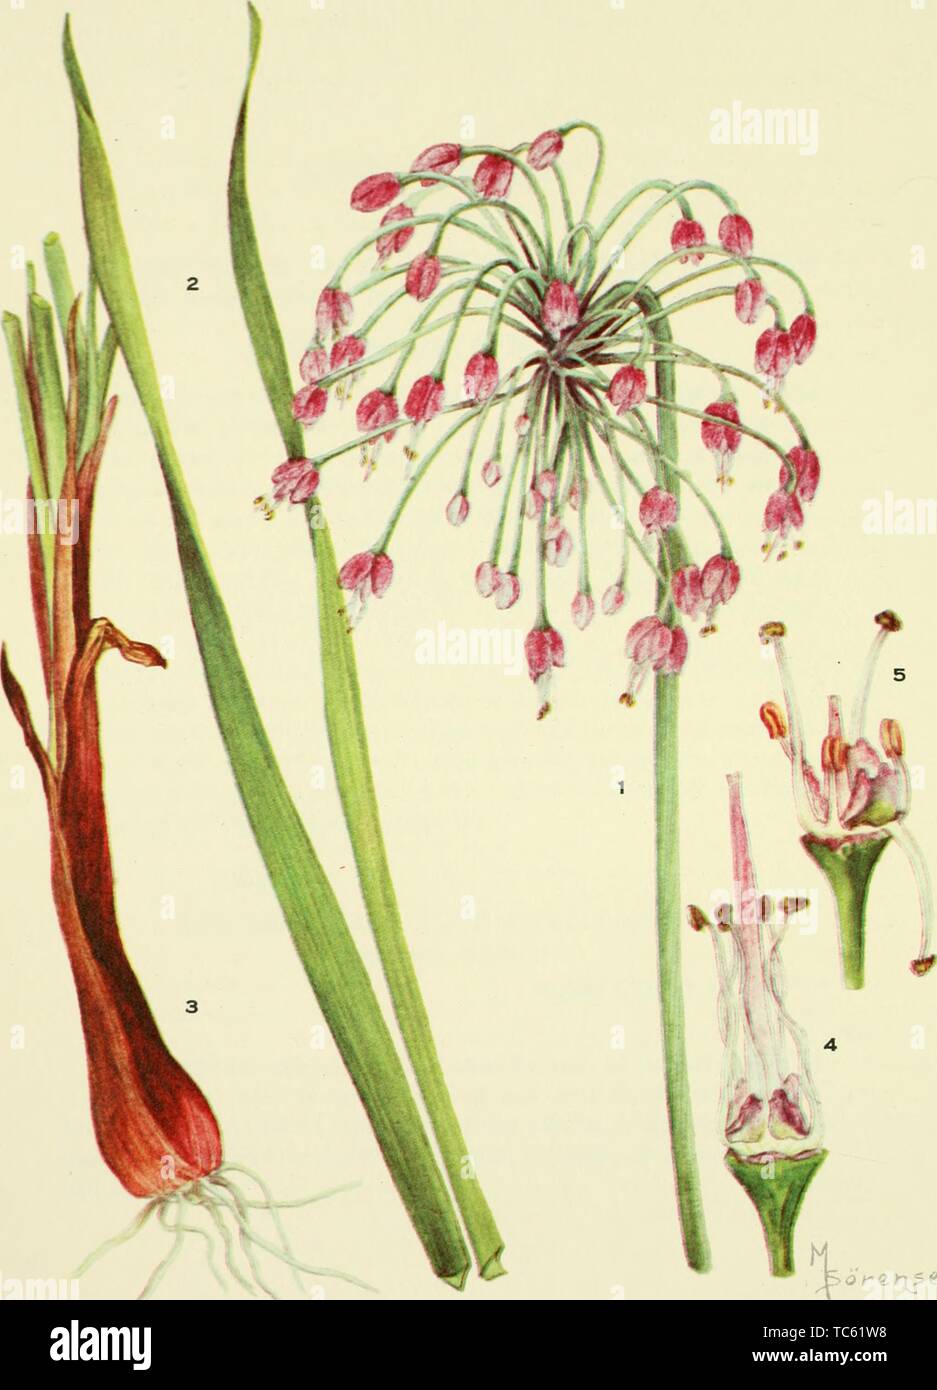 Engravings of Nodding Onion (Allium cernuum), from the book 'Addisonia' by the New York Botanical Garden, 1923. Courtesy Internet Archive. () Stock Photo